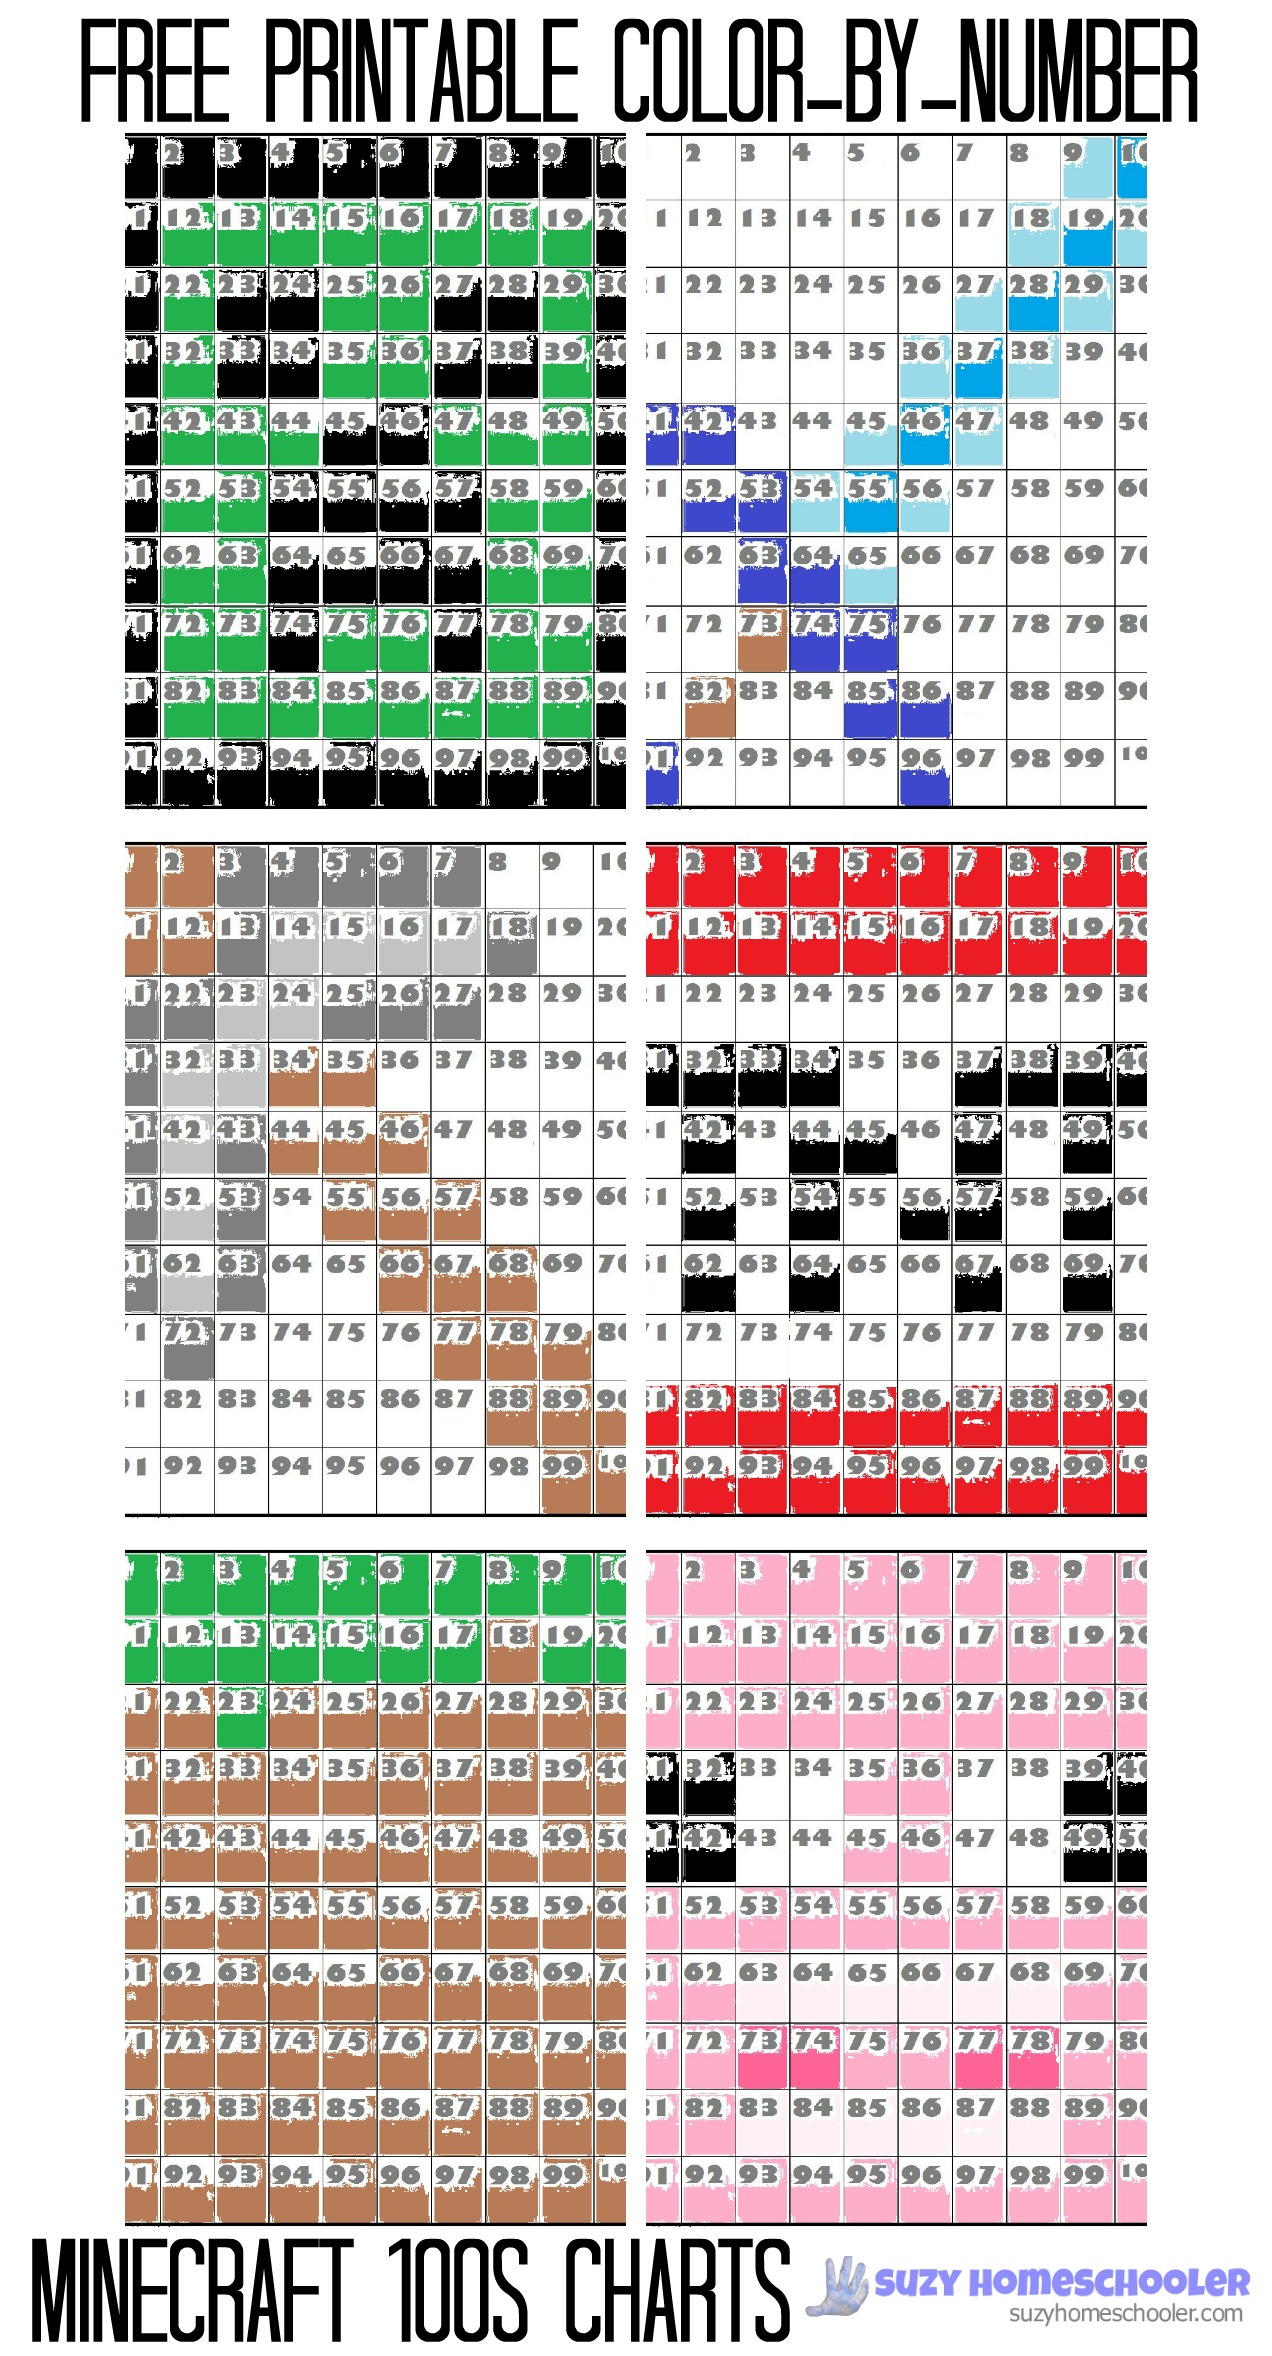 Free Printable Minecraft Color-By-Number 100S Chart Pictures